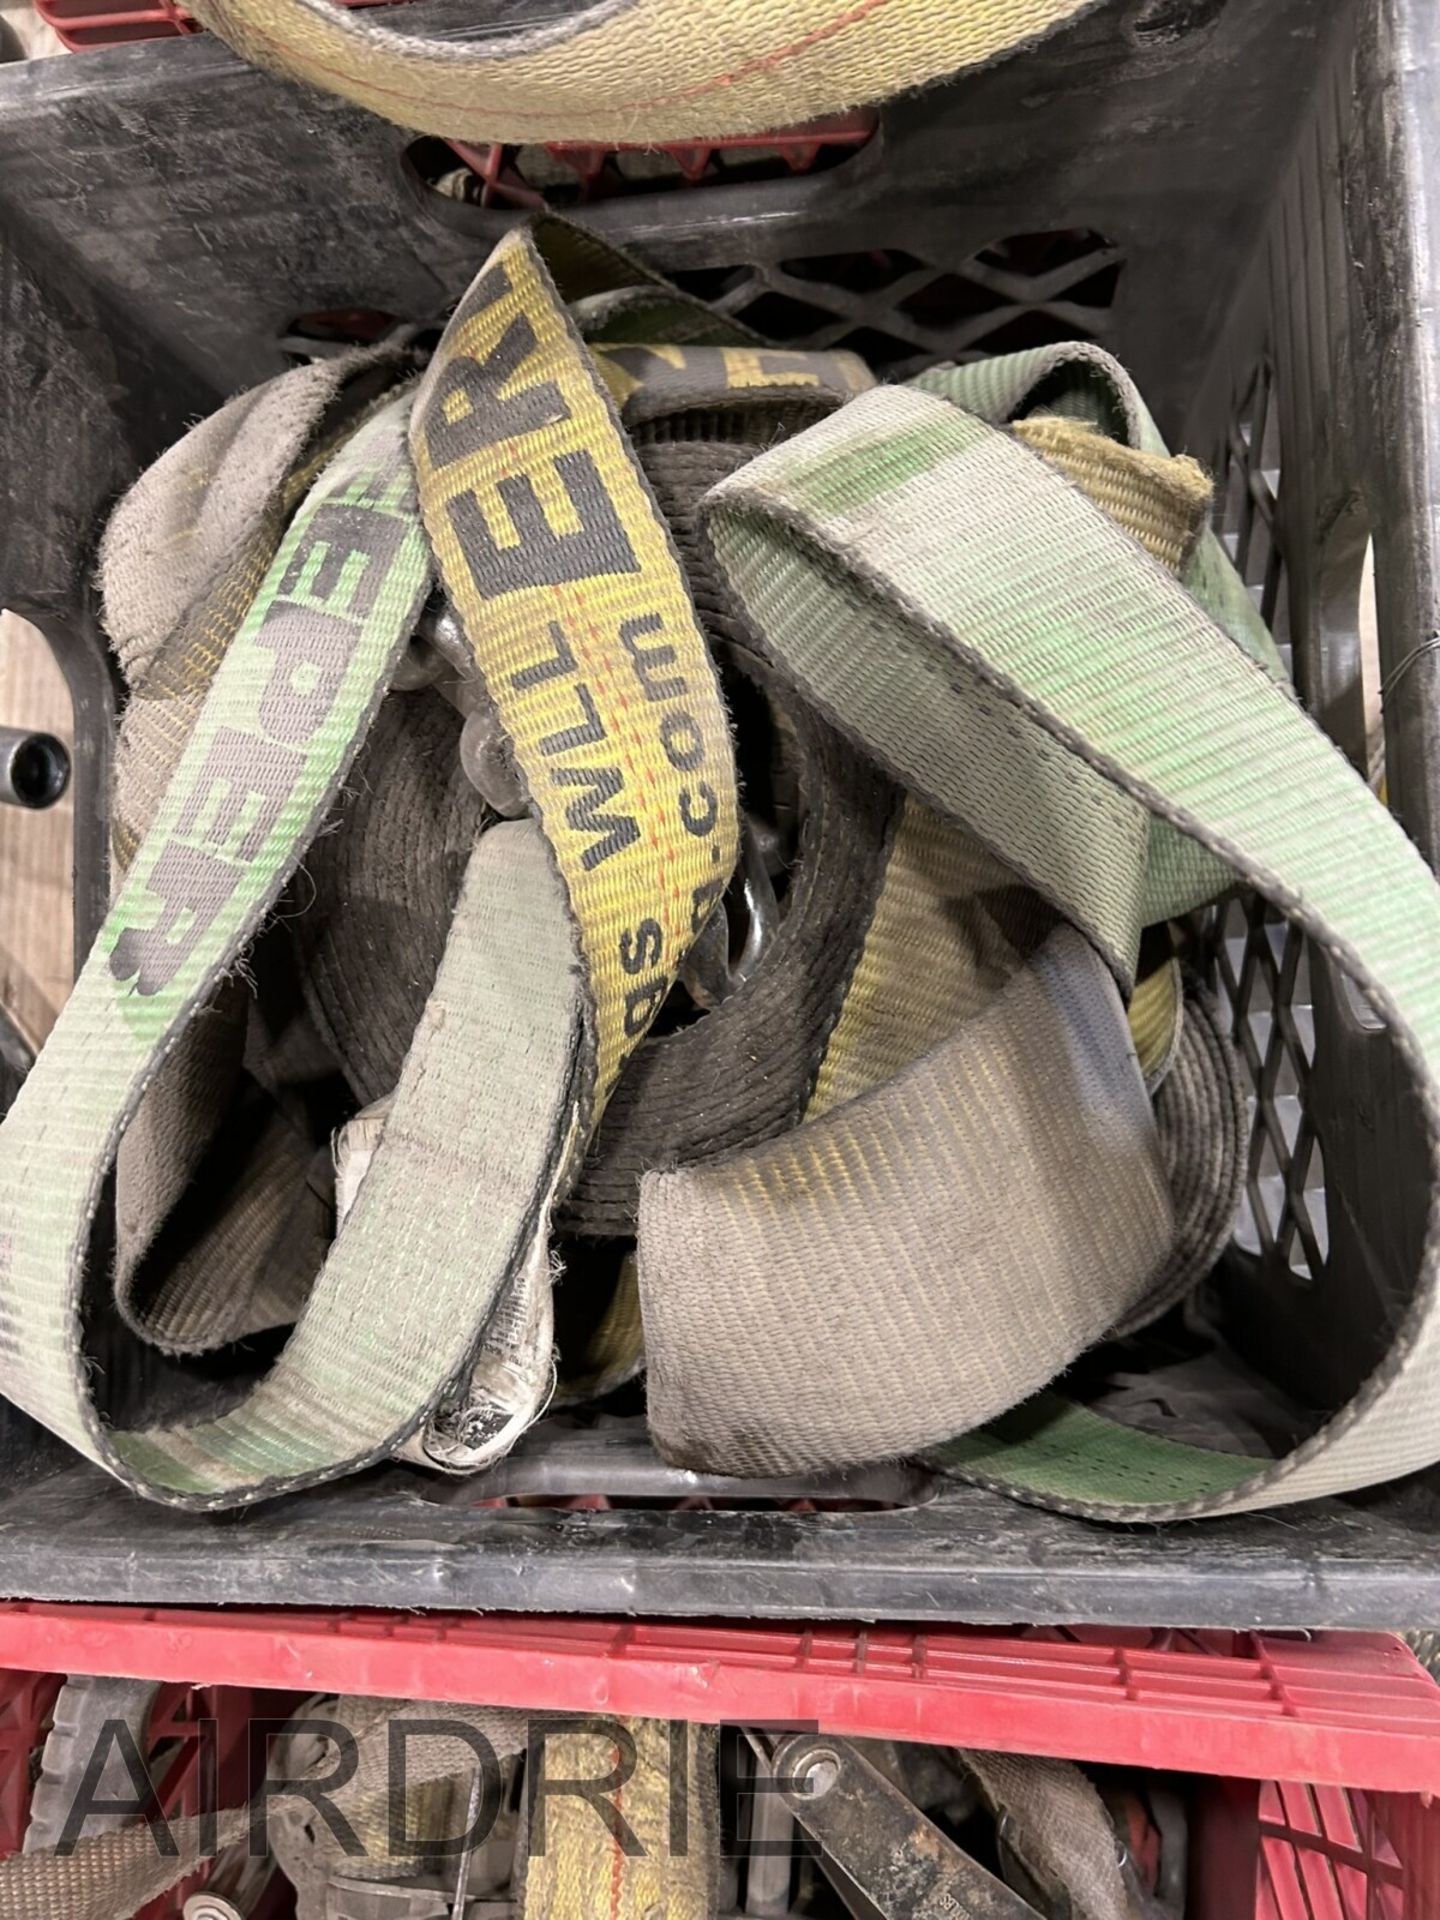 *OFFSITE* L/O ASSORTED RATCHET STRAPS AND TIE DOWNS - Image 5 of 6